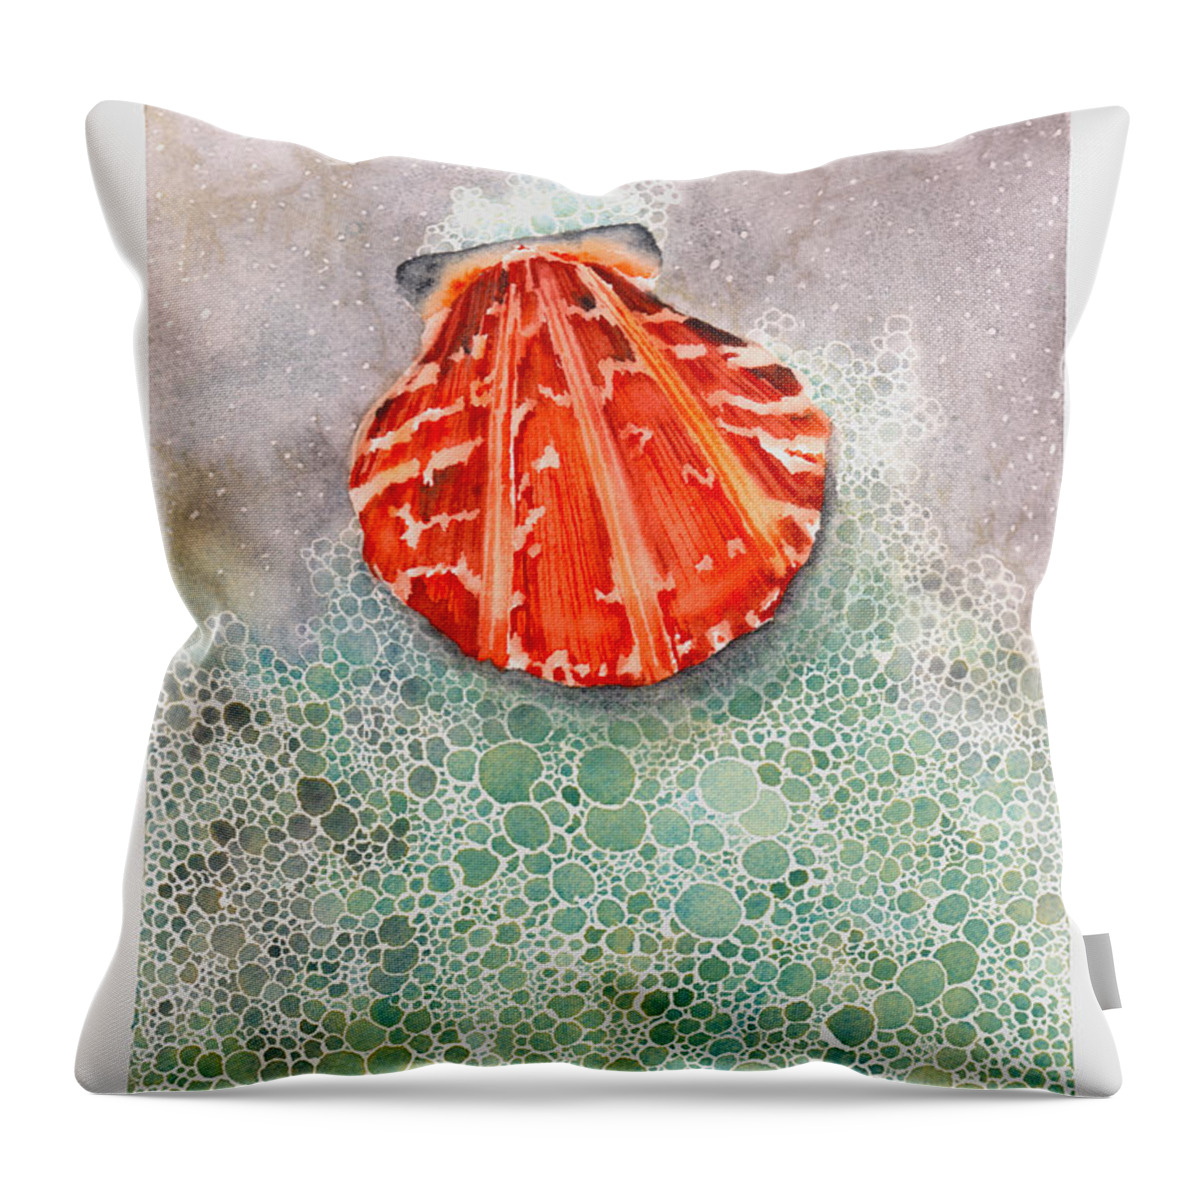 Calico Scallop Throw Pillow featuring the painting Scallop Shell by Hilda Wagner